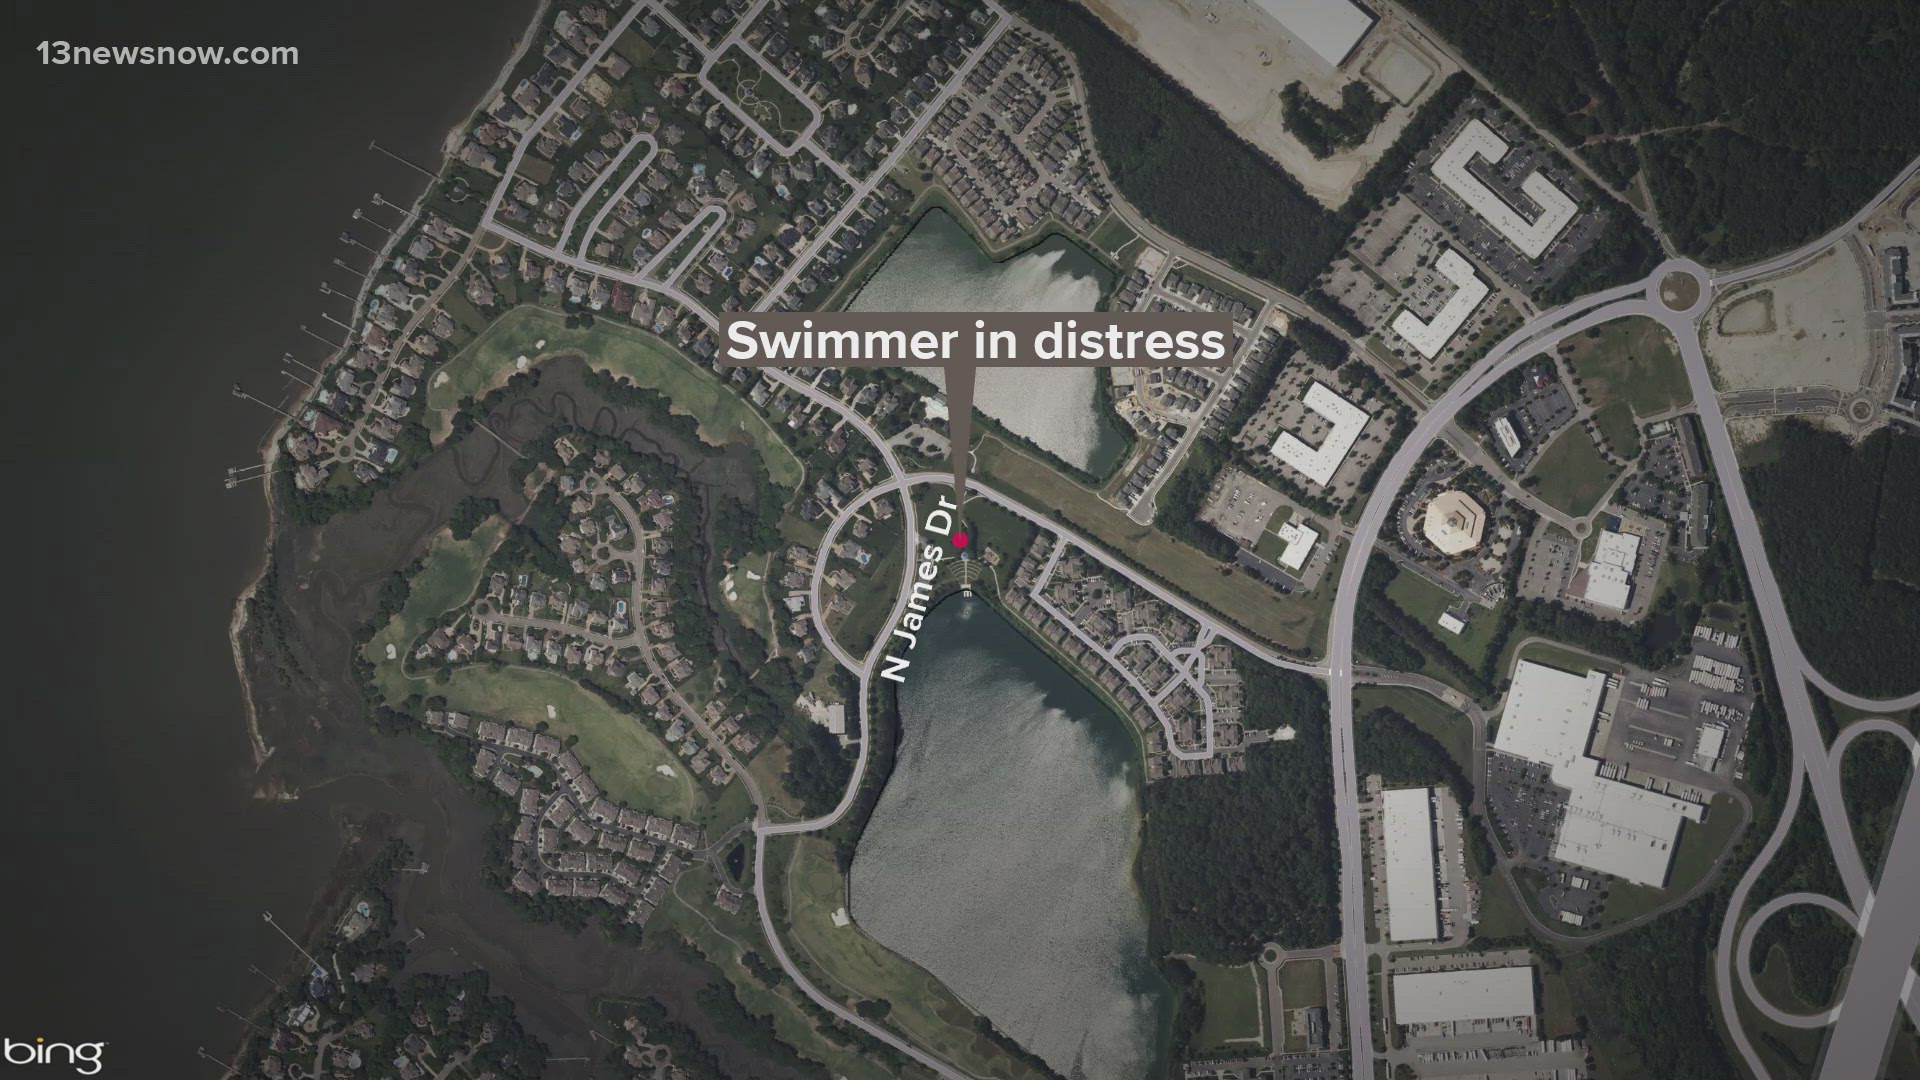 Suffolk Fire and Rescue responded to a call for a swimmer in distress.